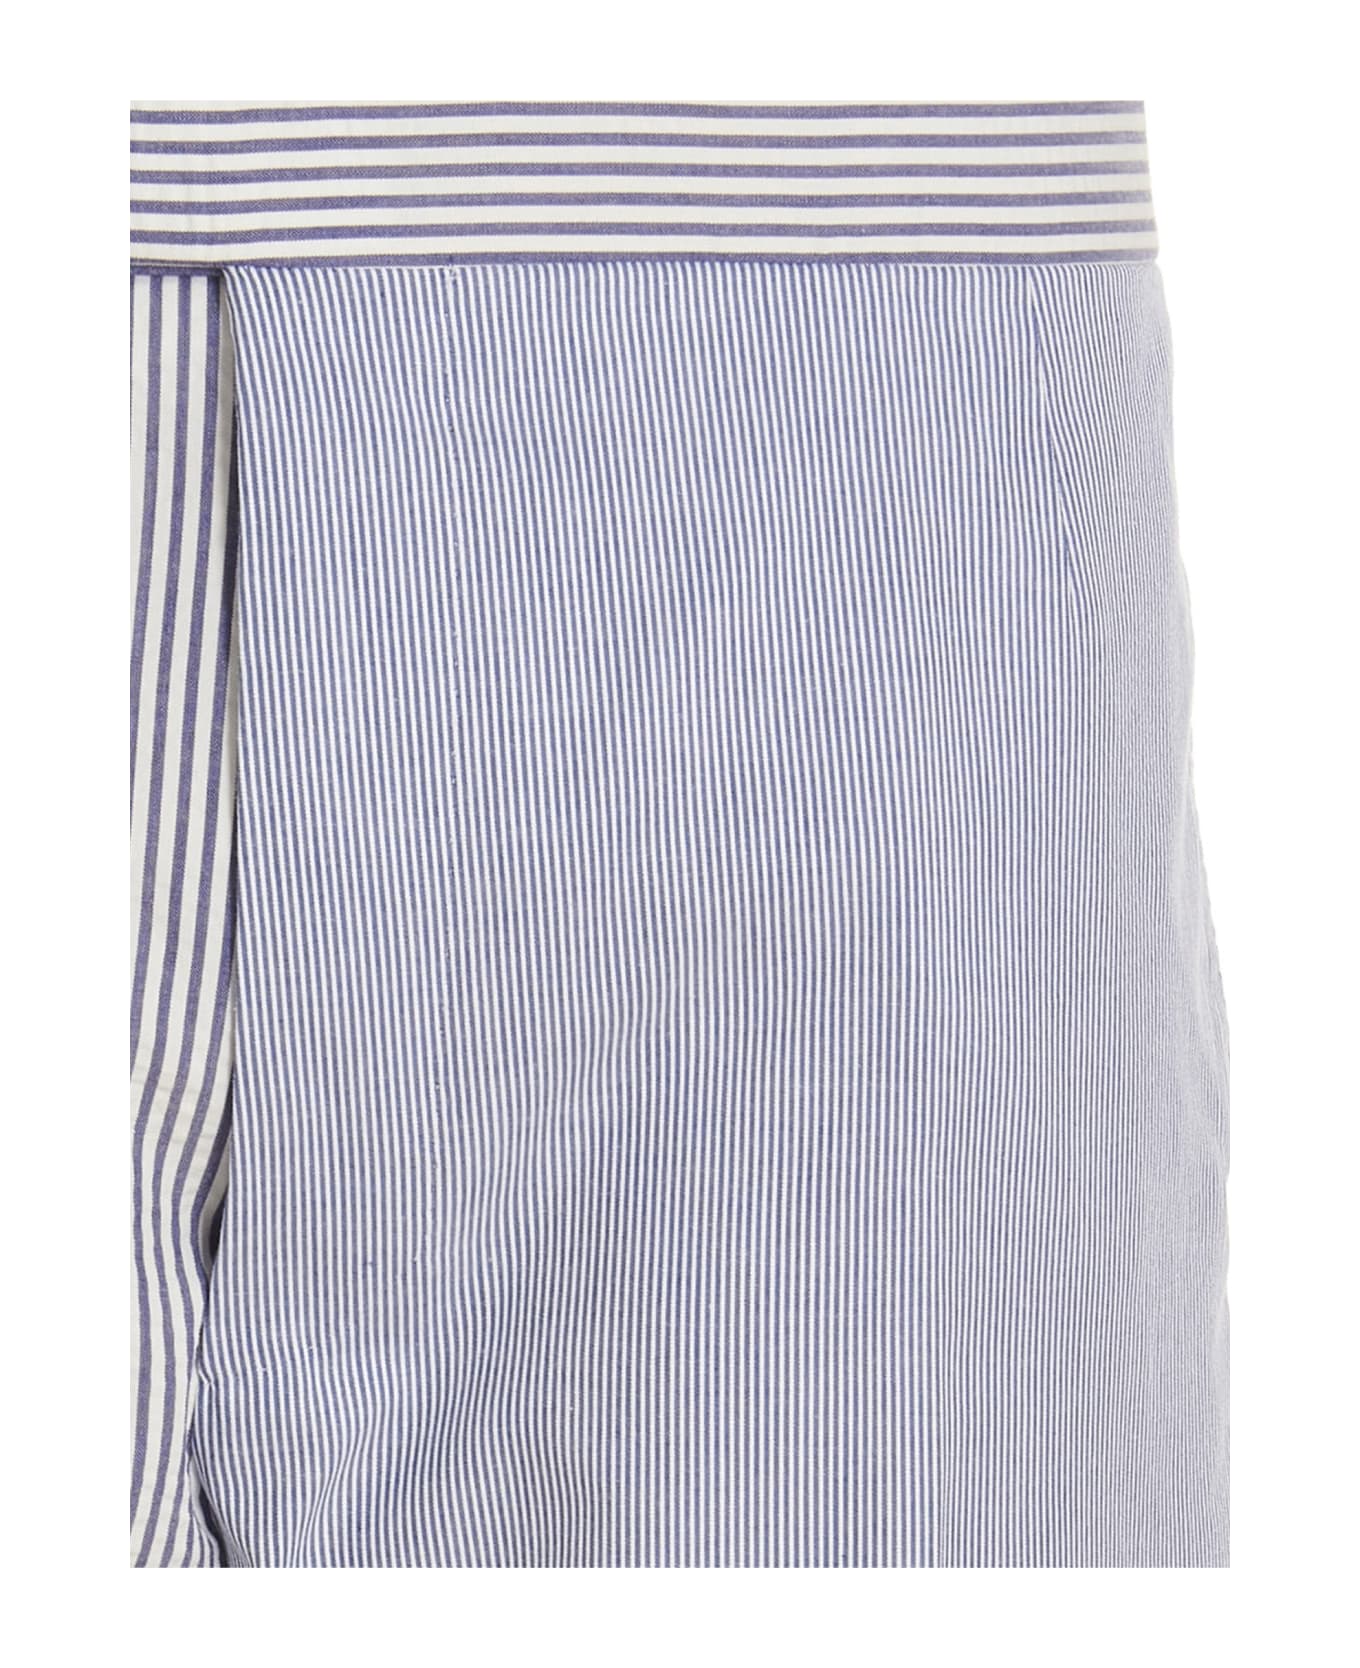 Thom Browne Striped Trousers - Light Blue